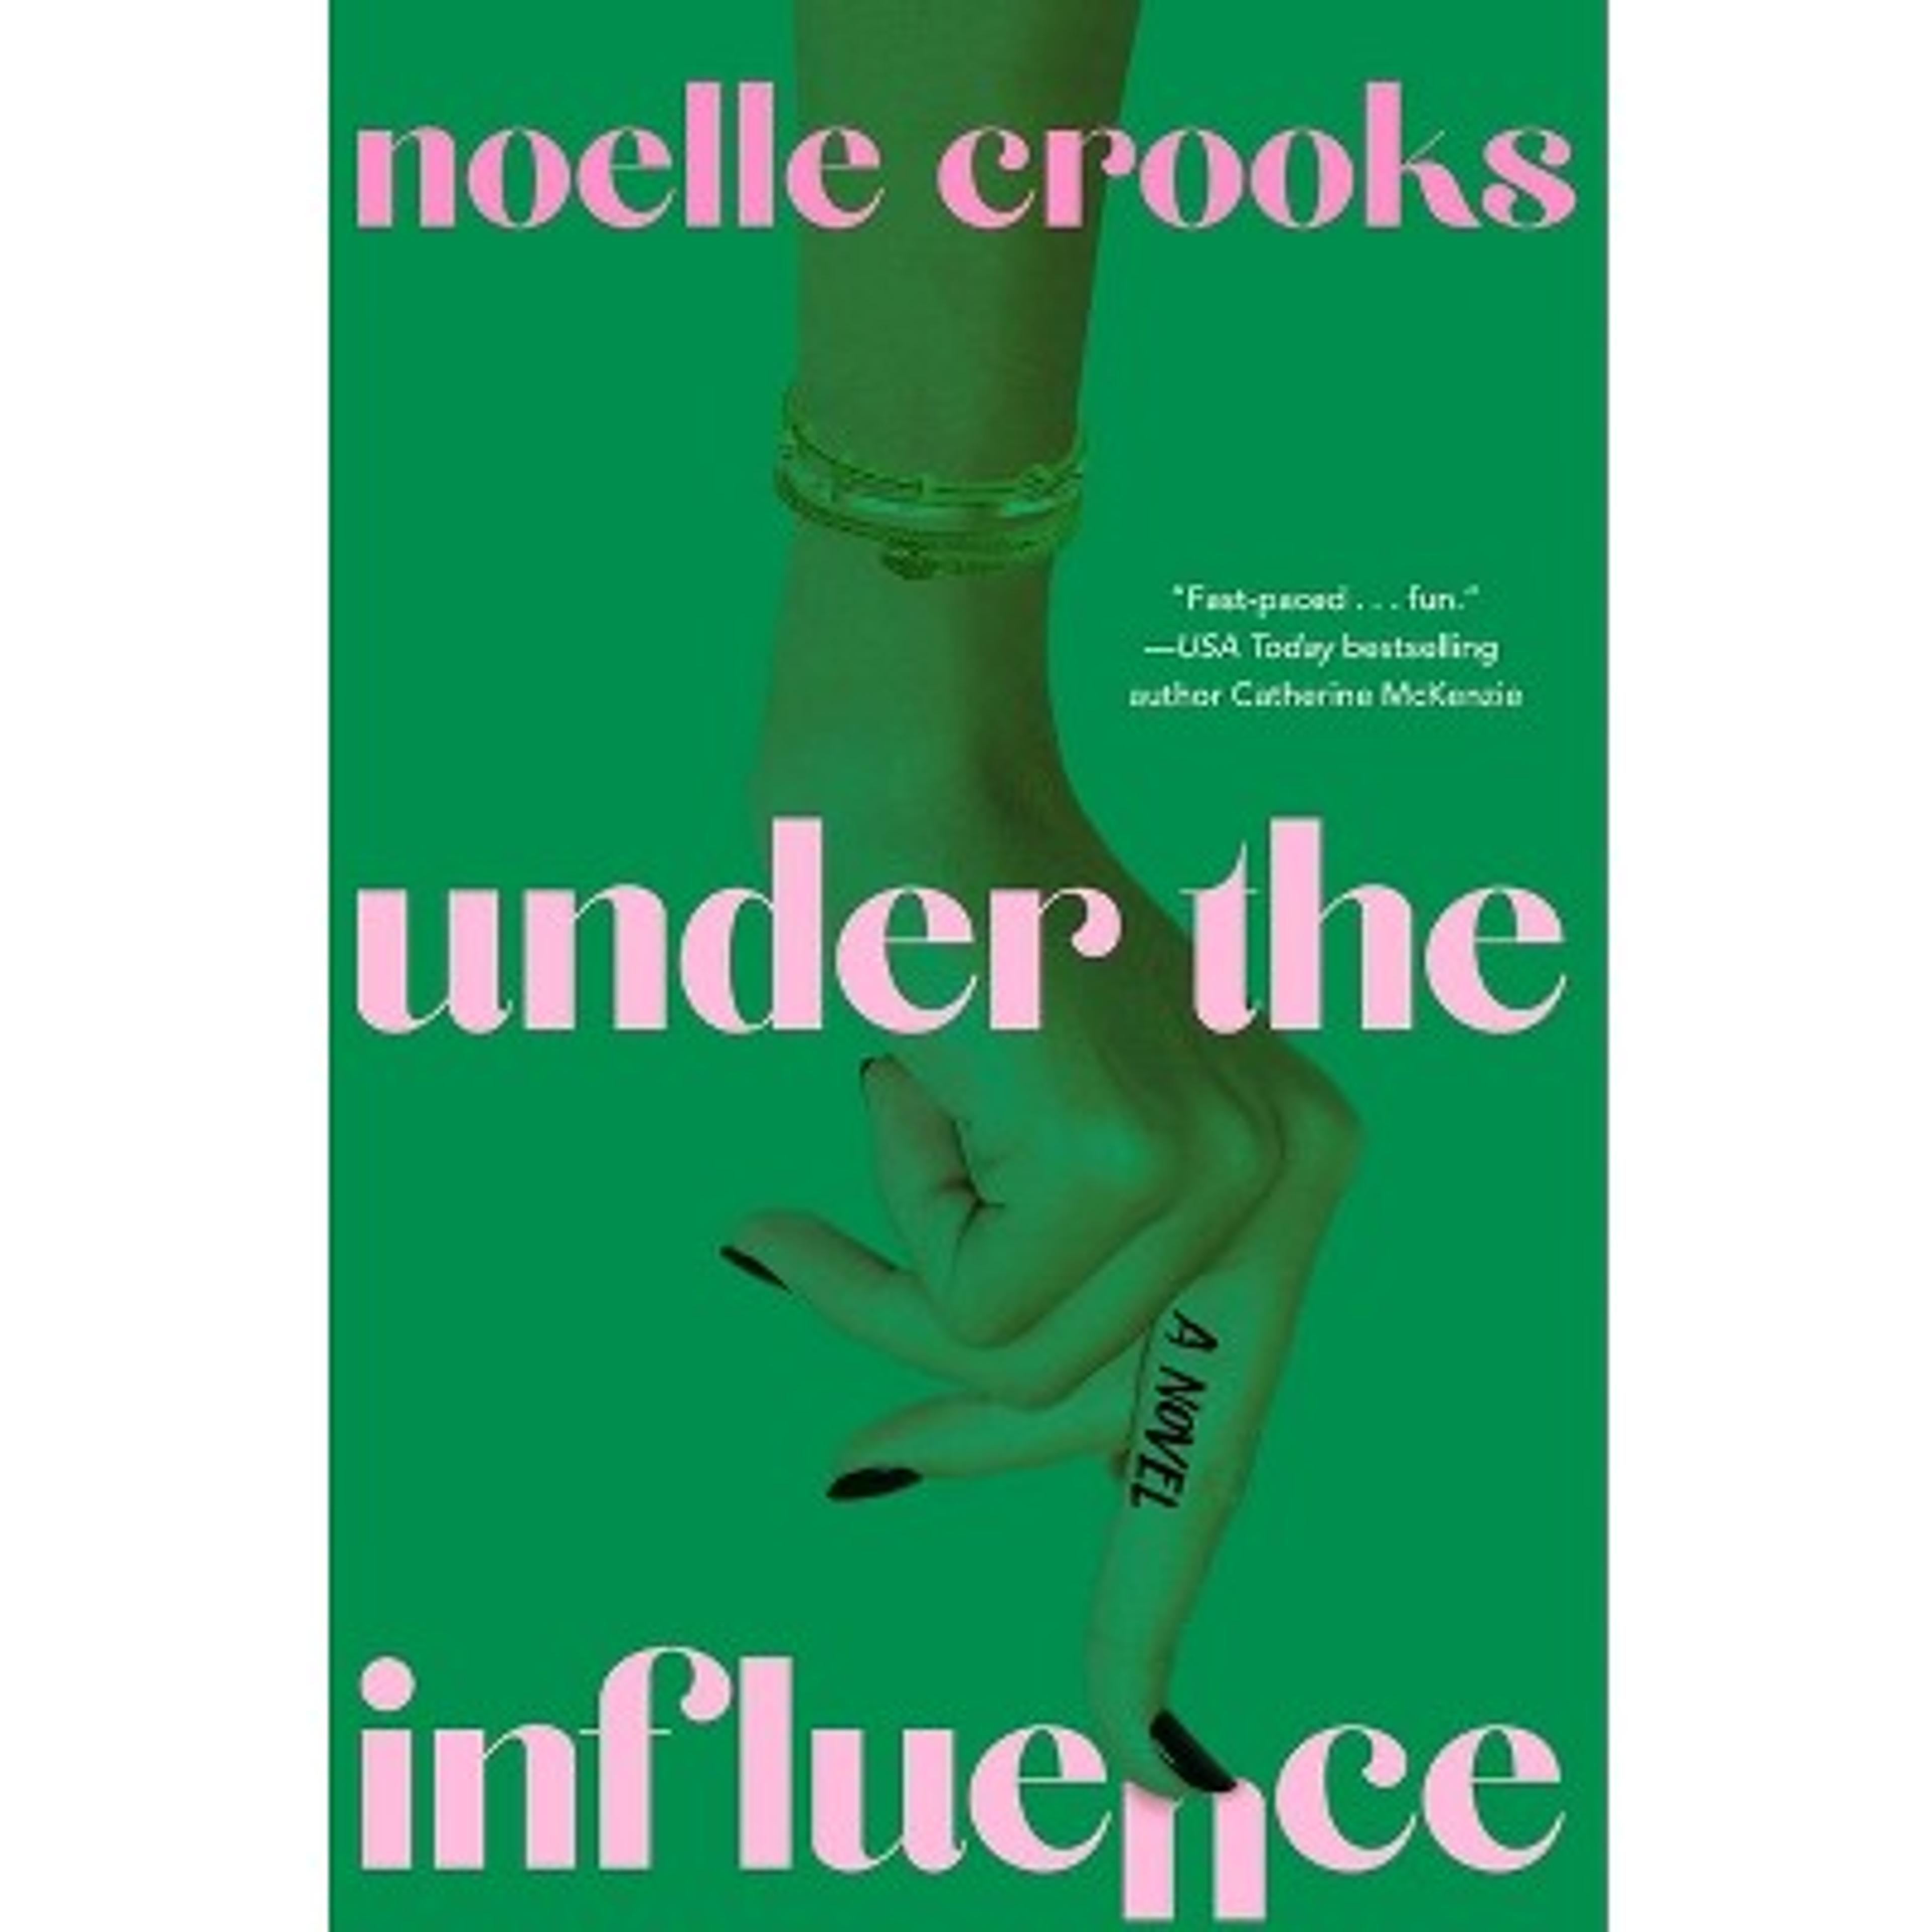 Under the Influence - by  Noelle Crooks (Hardcover)